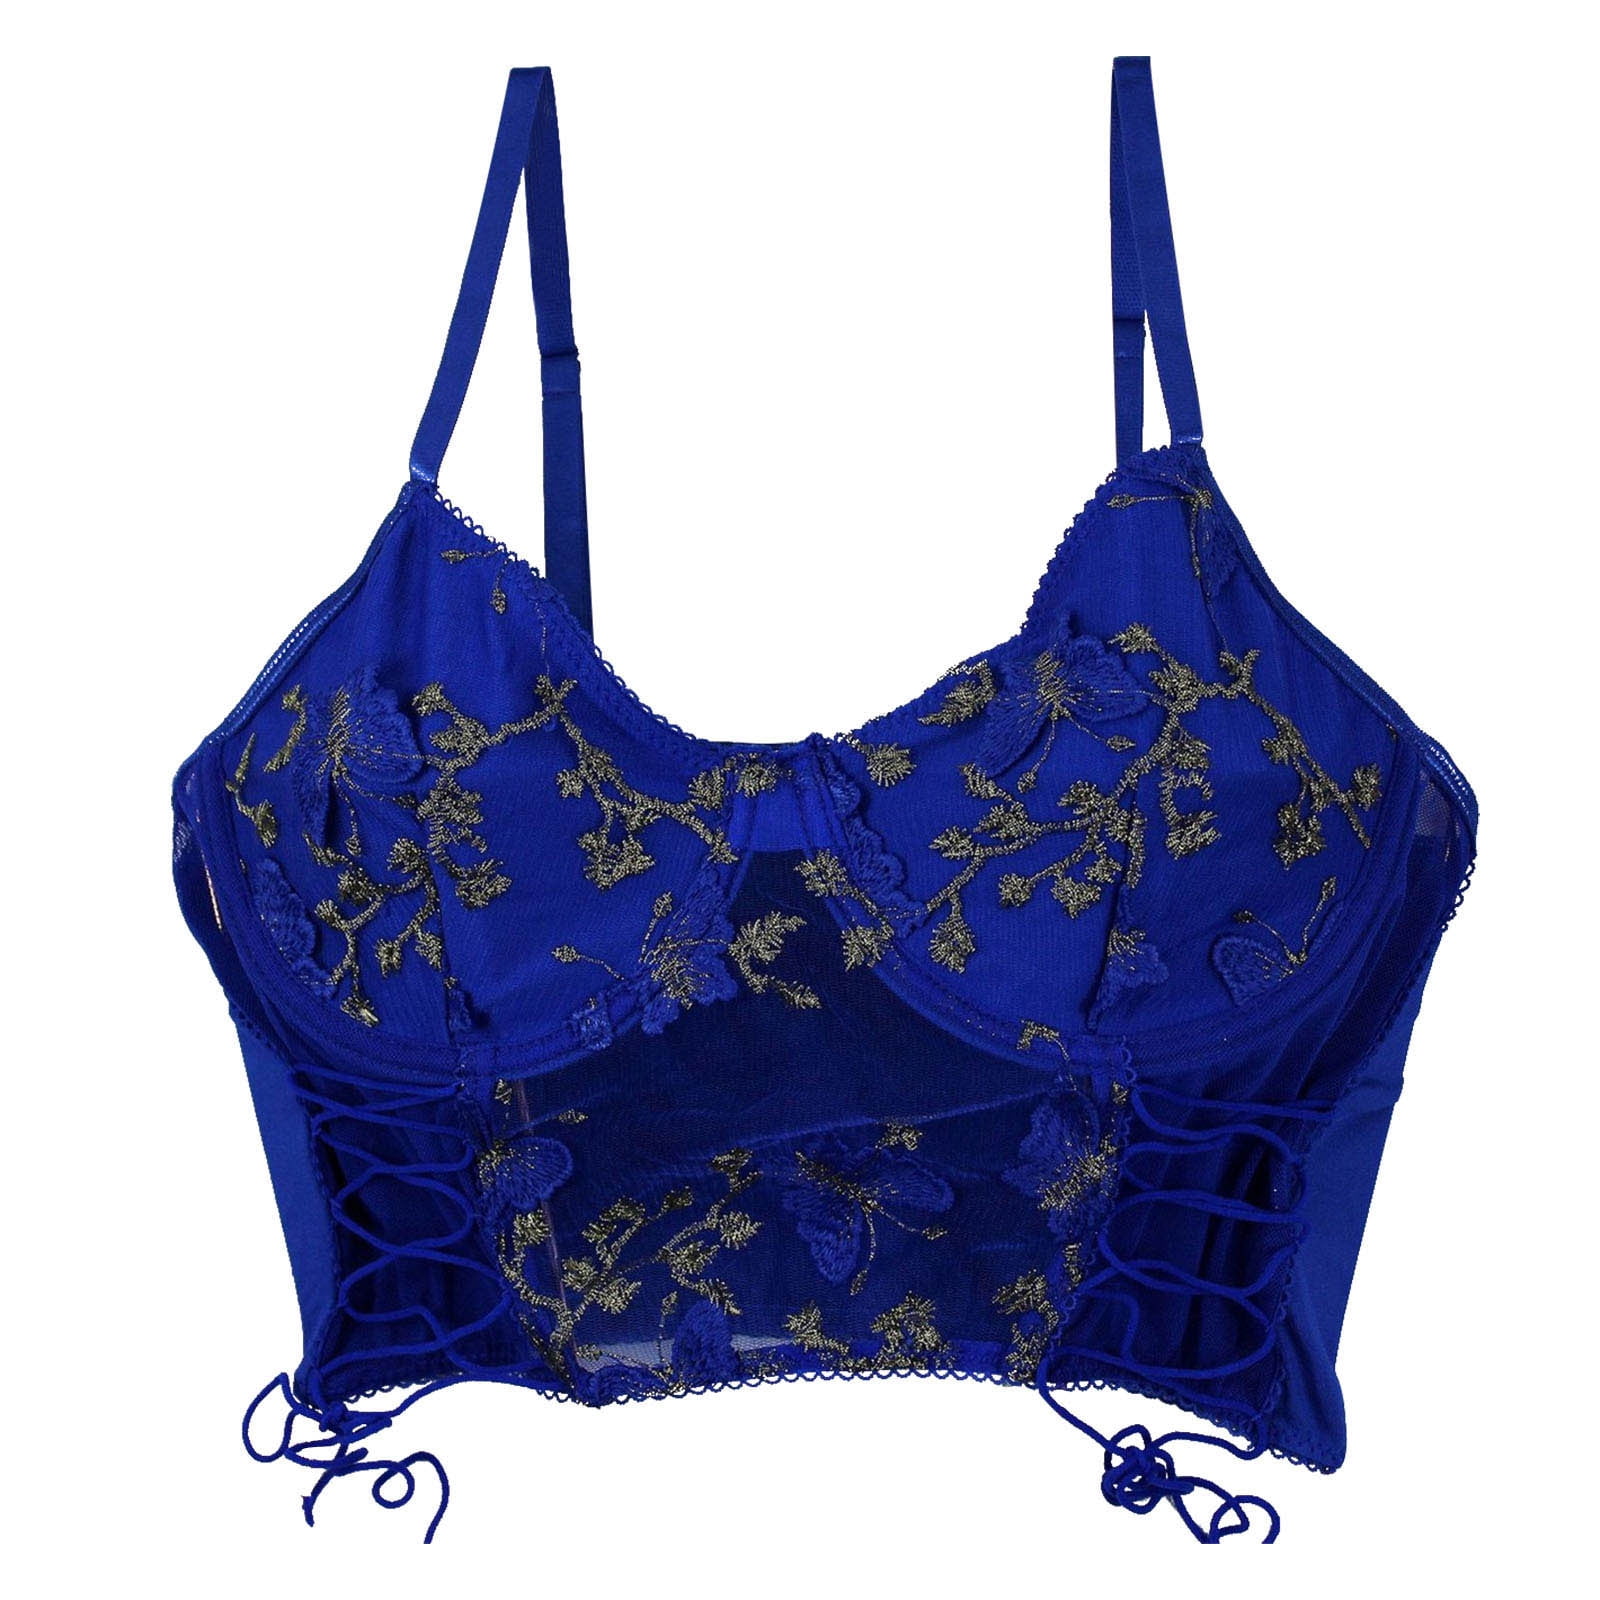 YYDGH Women's Floral Lace Cami Crop Top Spaghetti Strap Sheer Mesh Corset  Bustier Tops Bralette Blue S 